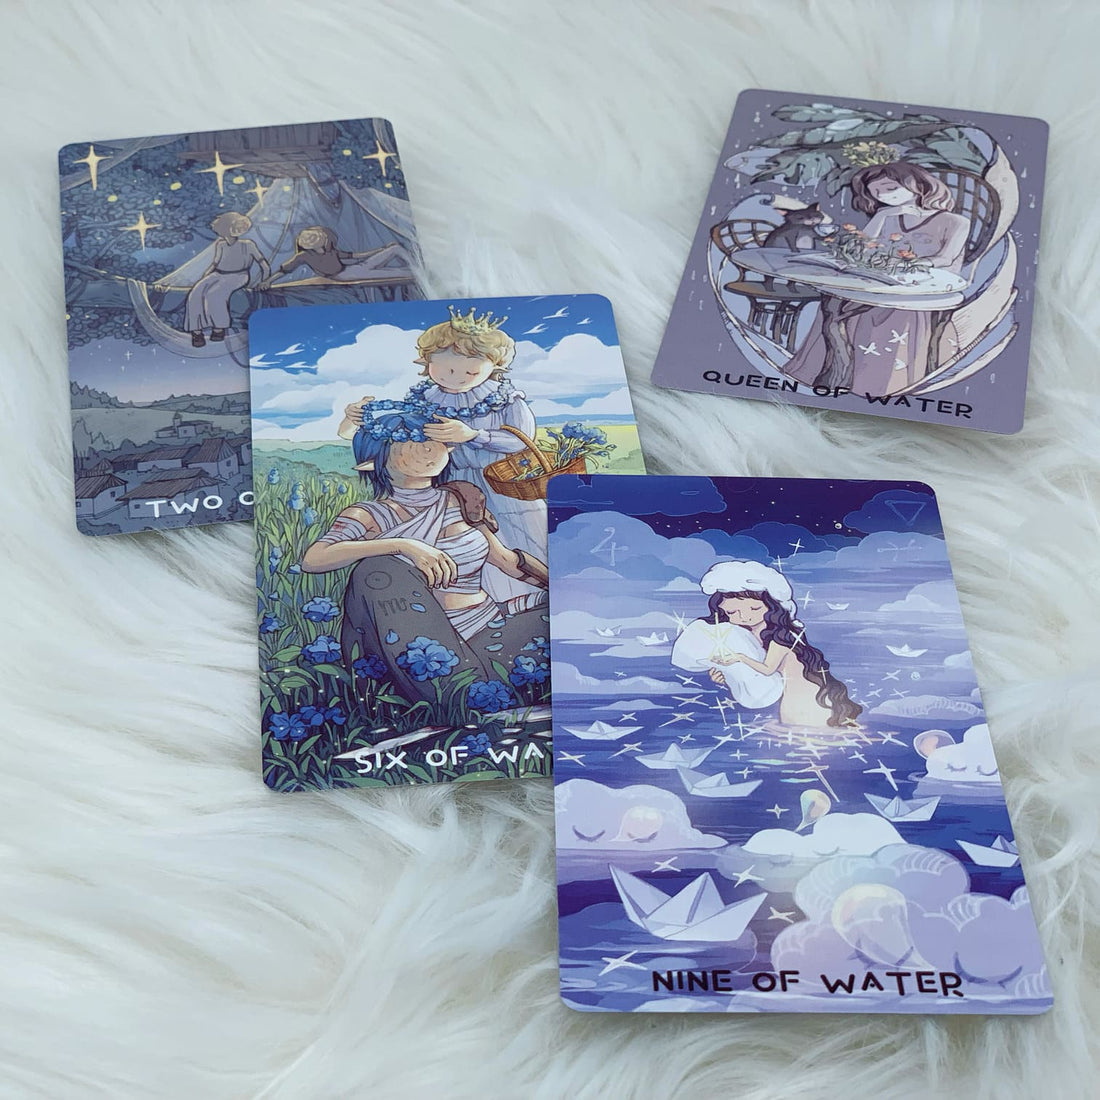 The deck consists of 22 Major Arcana & 56 Minor Arcana Cards, featuring Japanese-style illustrations of fairies and other magical creatures. It comes with a Guidebook with the descriptions and meanings of the cards.